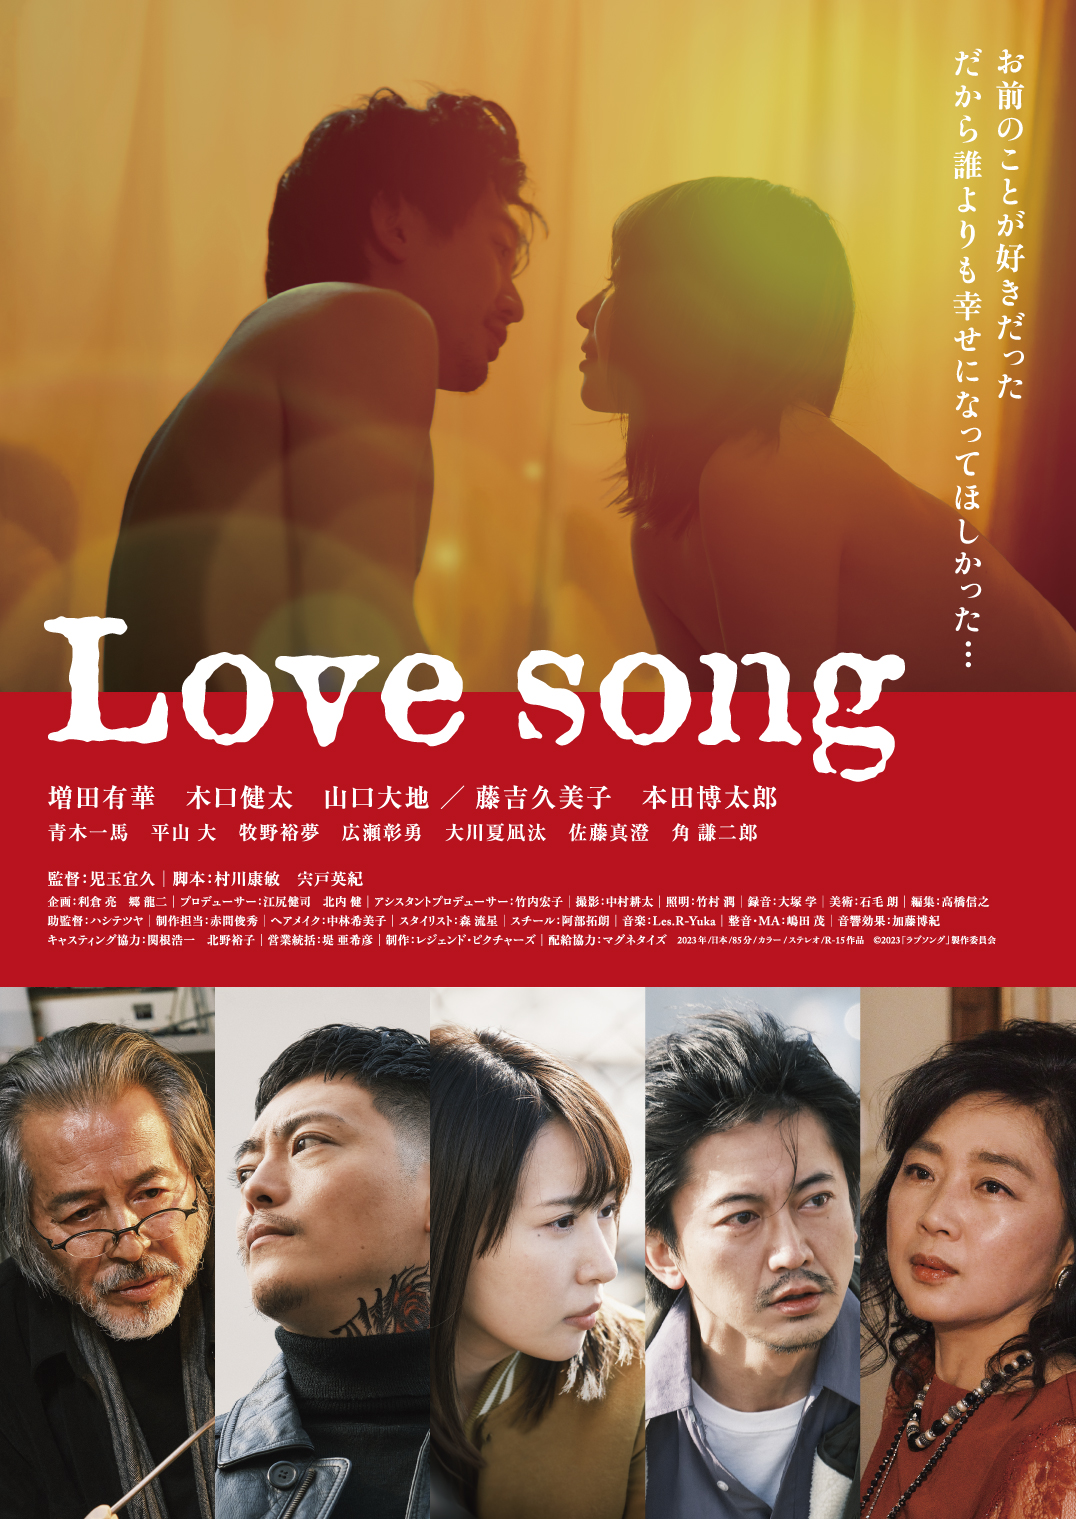 「Love song」